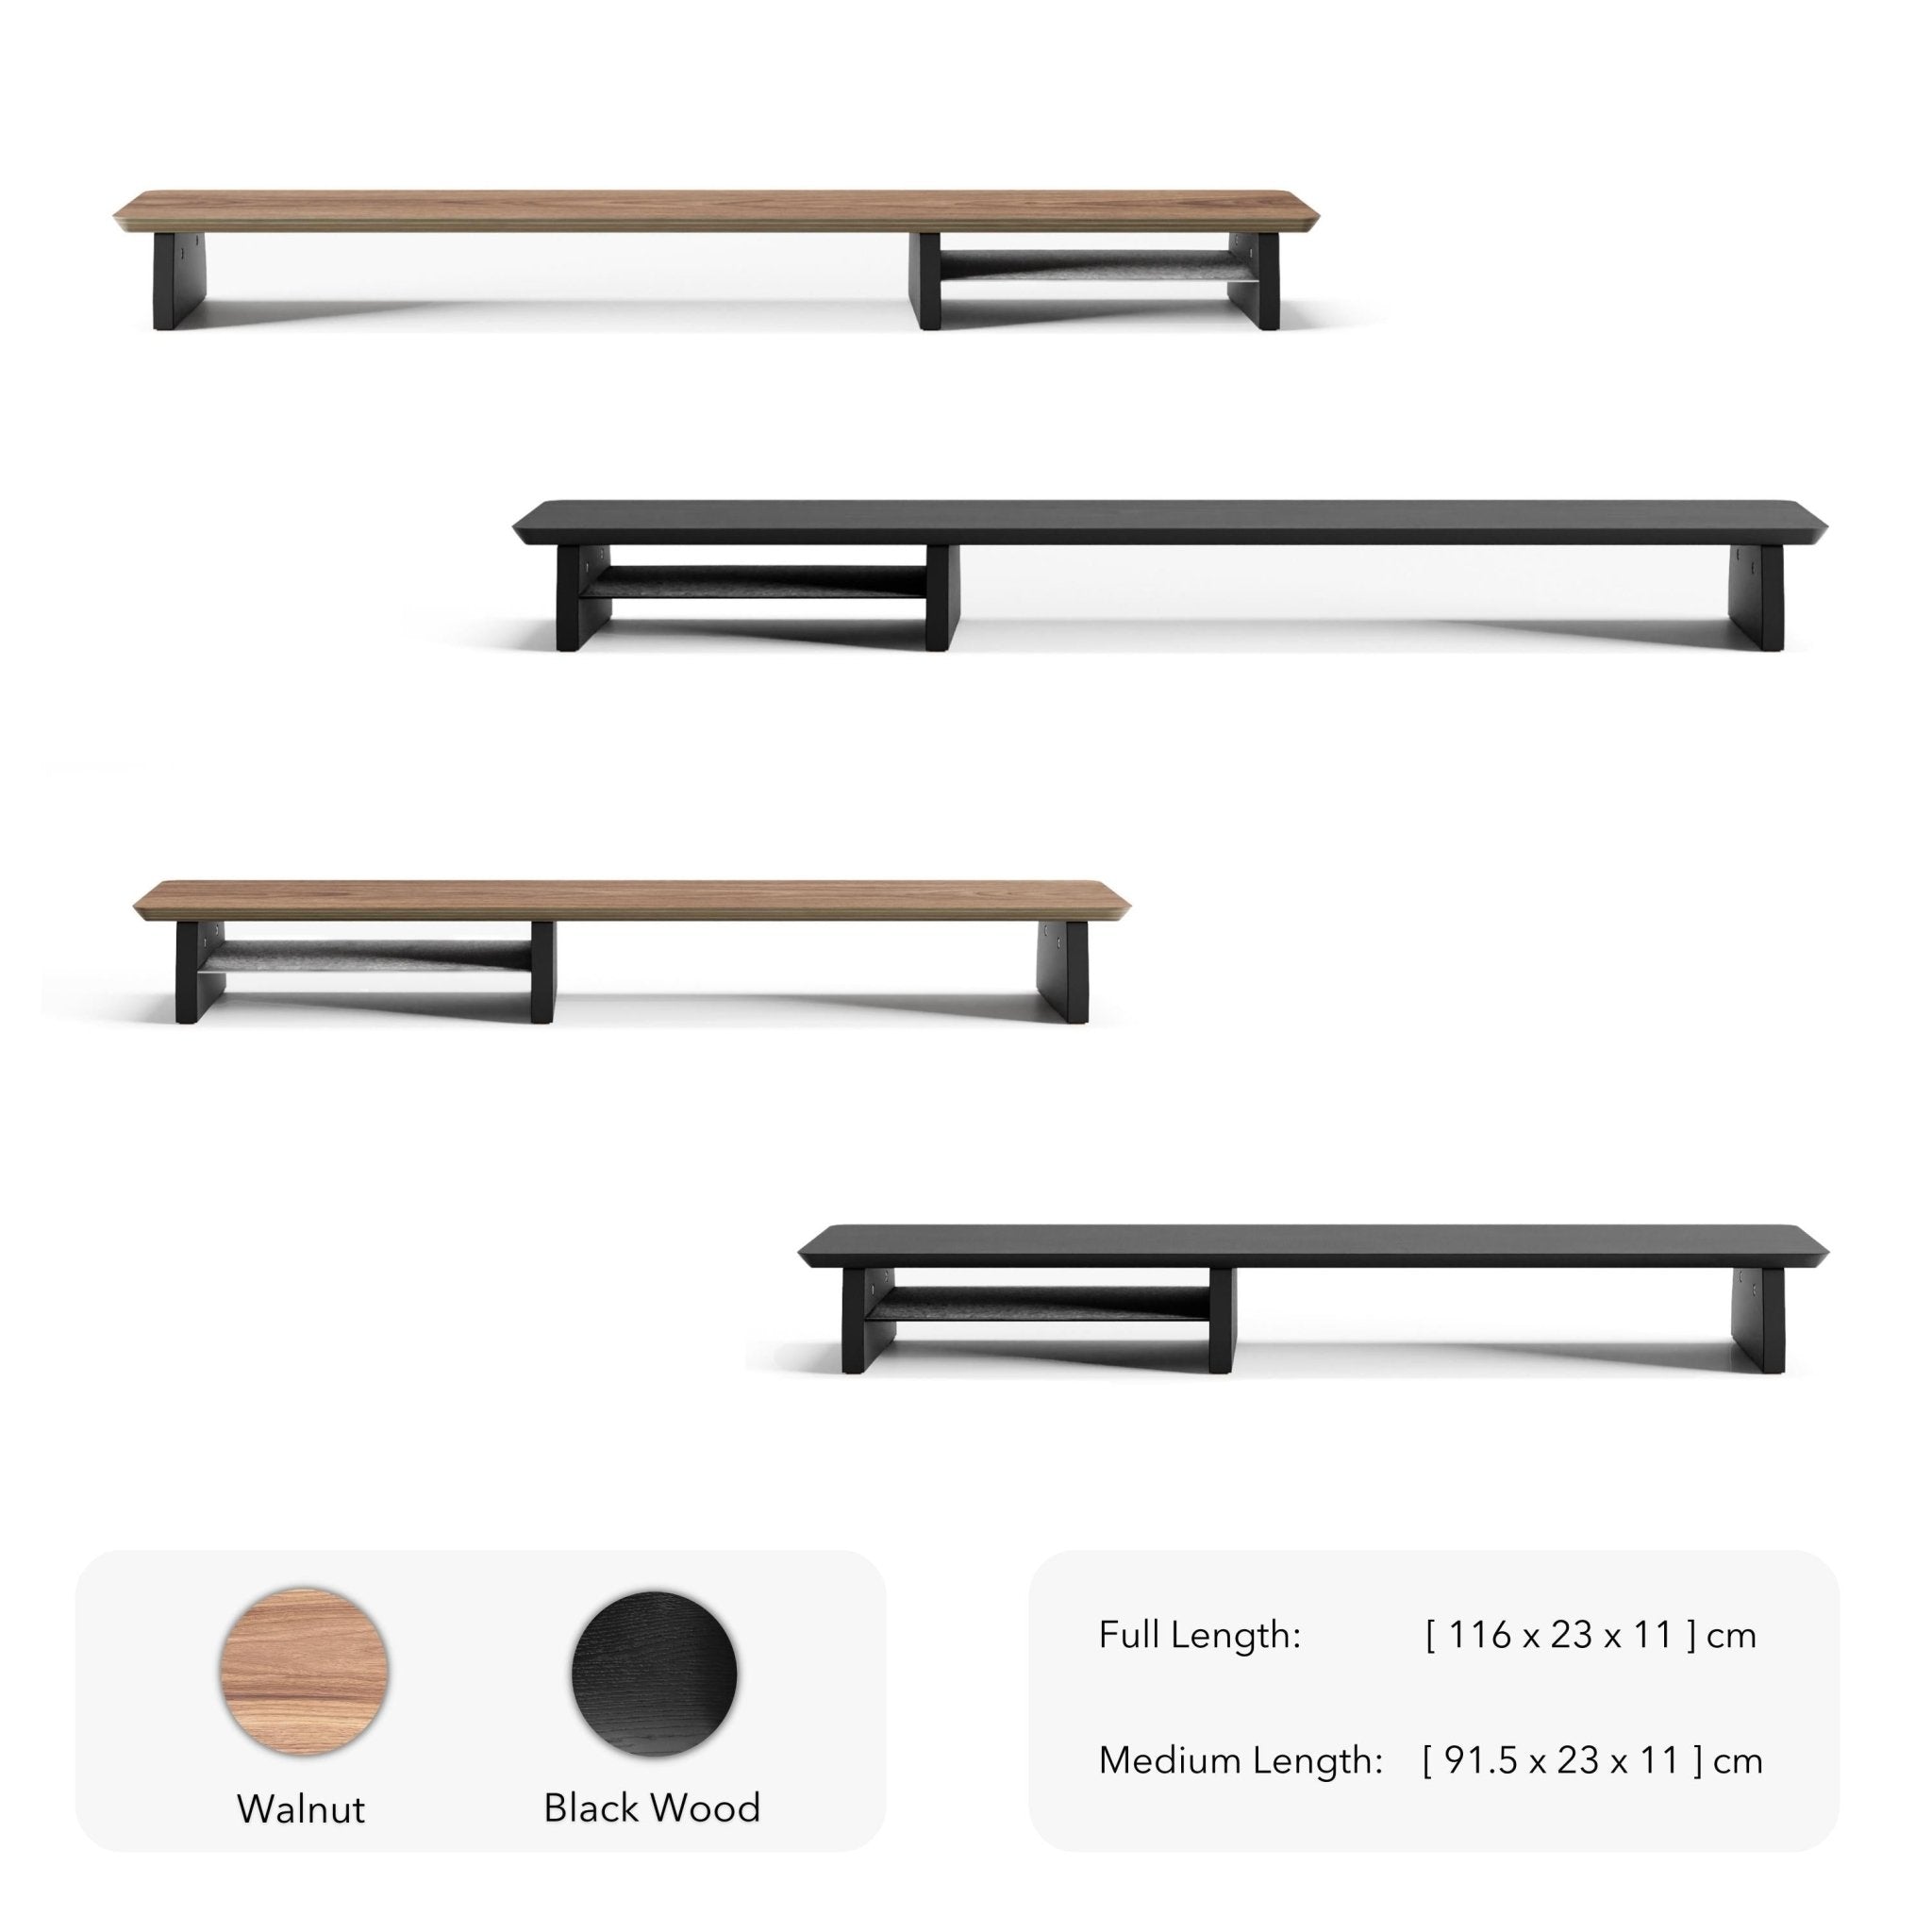 Raico desk shelf is available in 2 colours; walnut and black. Raico monitor stand also comes in 2 different sizes; Full length in 116 cm width and medium size 91.5 cm width